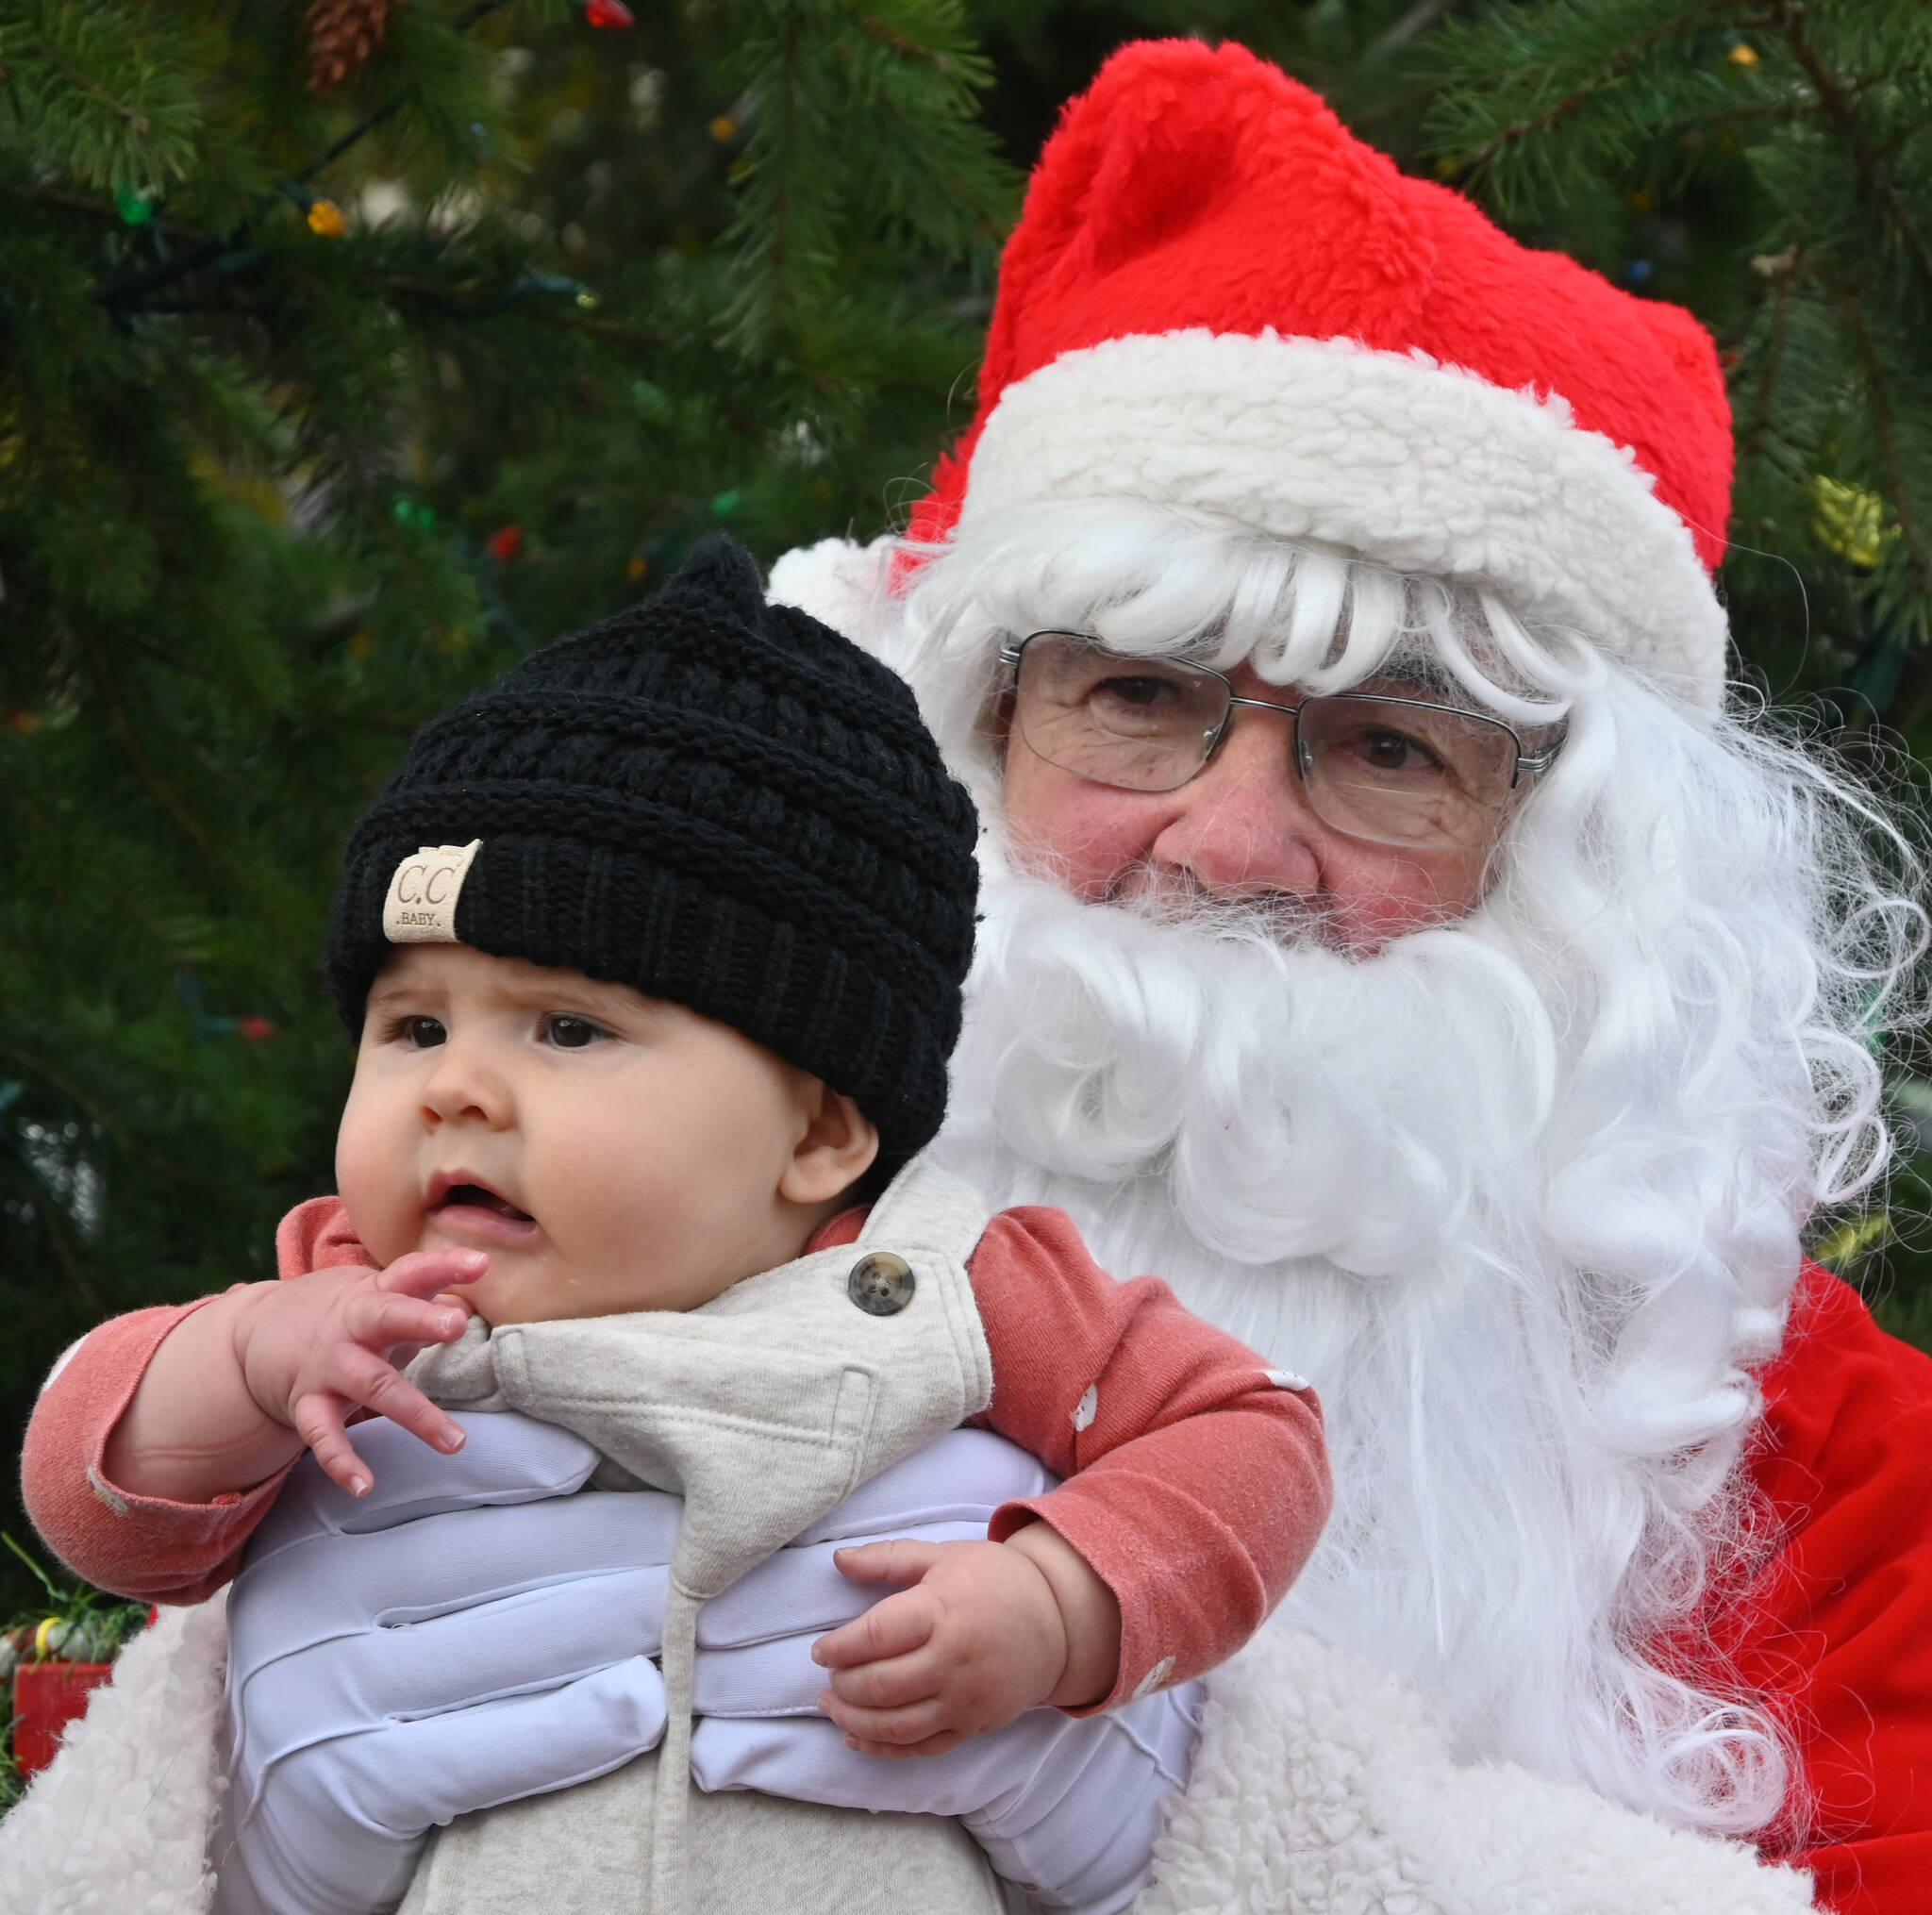 Sequim Gazette photo by Michael Dashiell / Five-month-old Maisy Gonzalez spends some quality time with Santa Claus (Stephen Rosales) at the Hometown Holidays event Saturday afternoon in downtown Sequim.